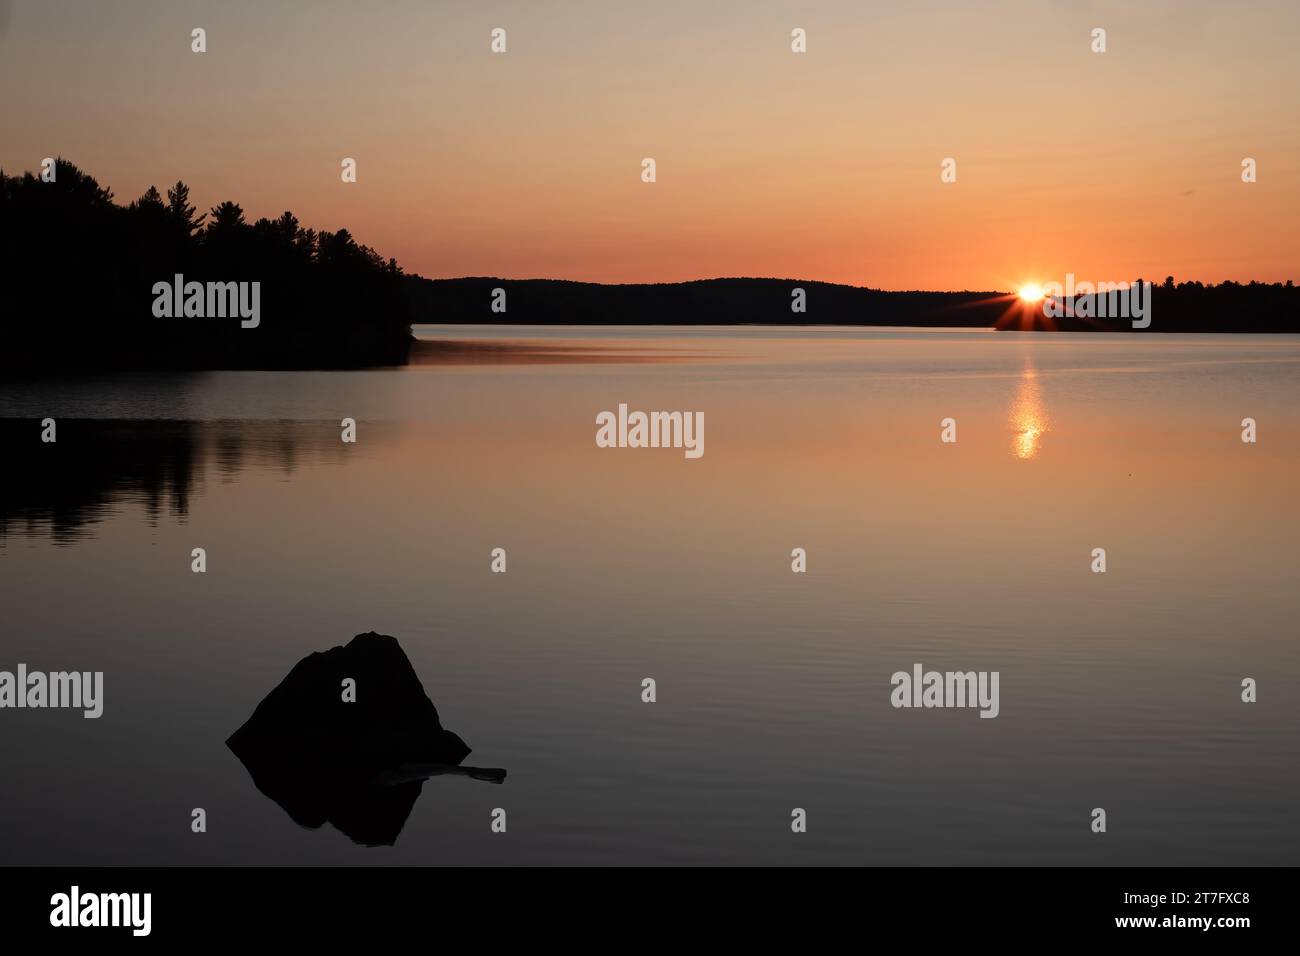 Peaceful sunset scenic at Galeairy Lake in Algonquin Park Stock Photo